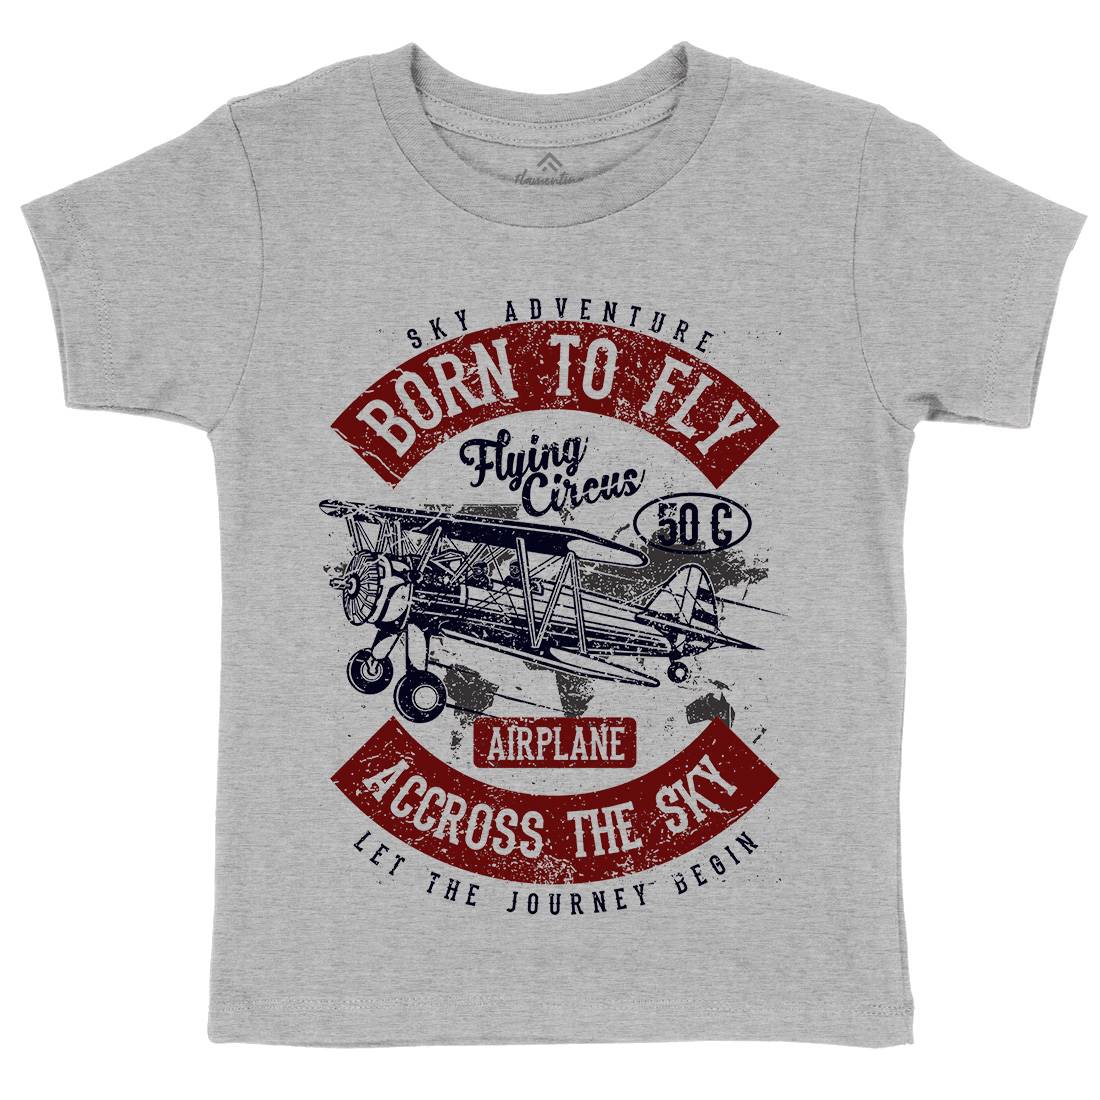 Born To Fly Kids Crew Neck T-Shirt Vehicles A019